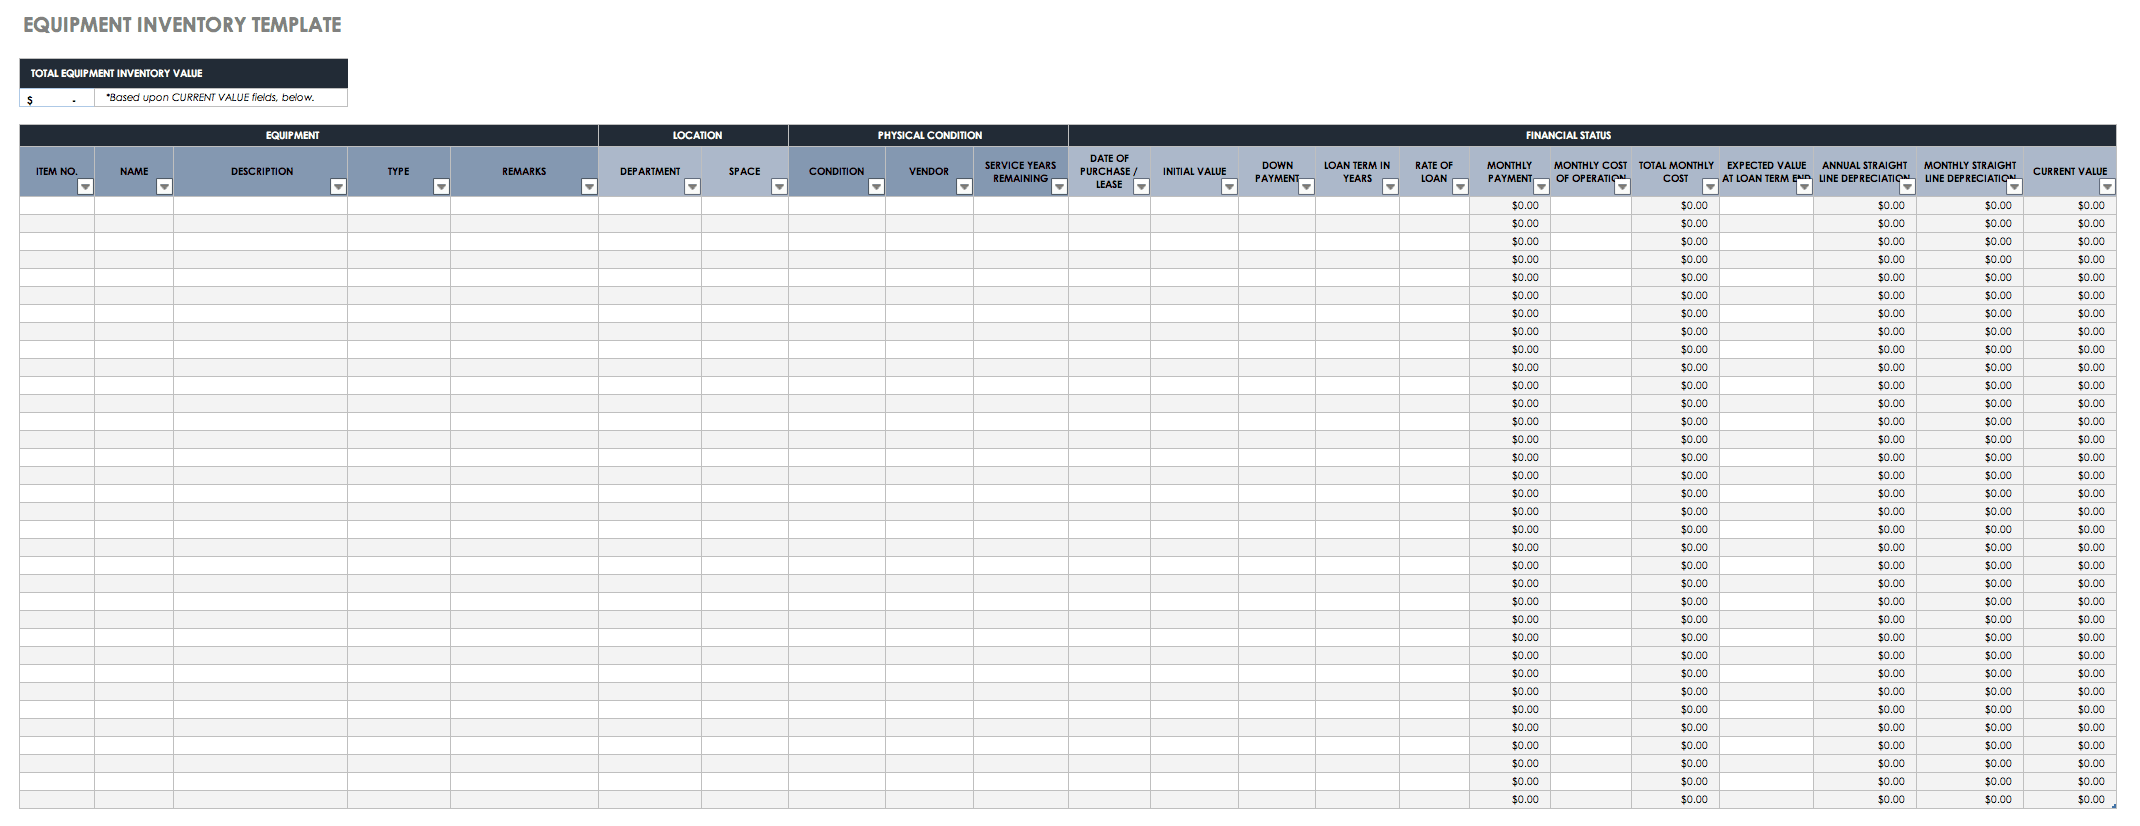 Inventory Report Sample Excel